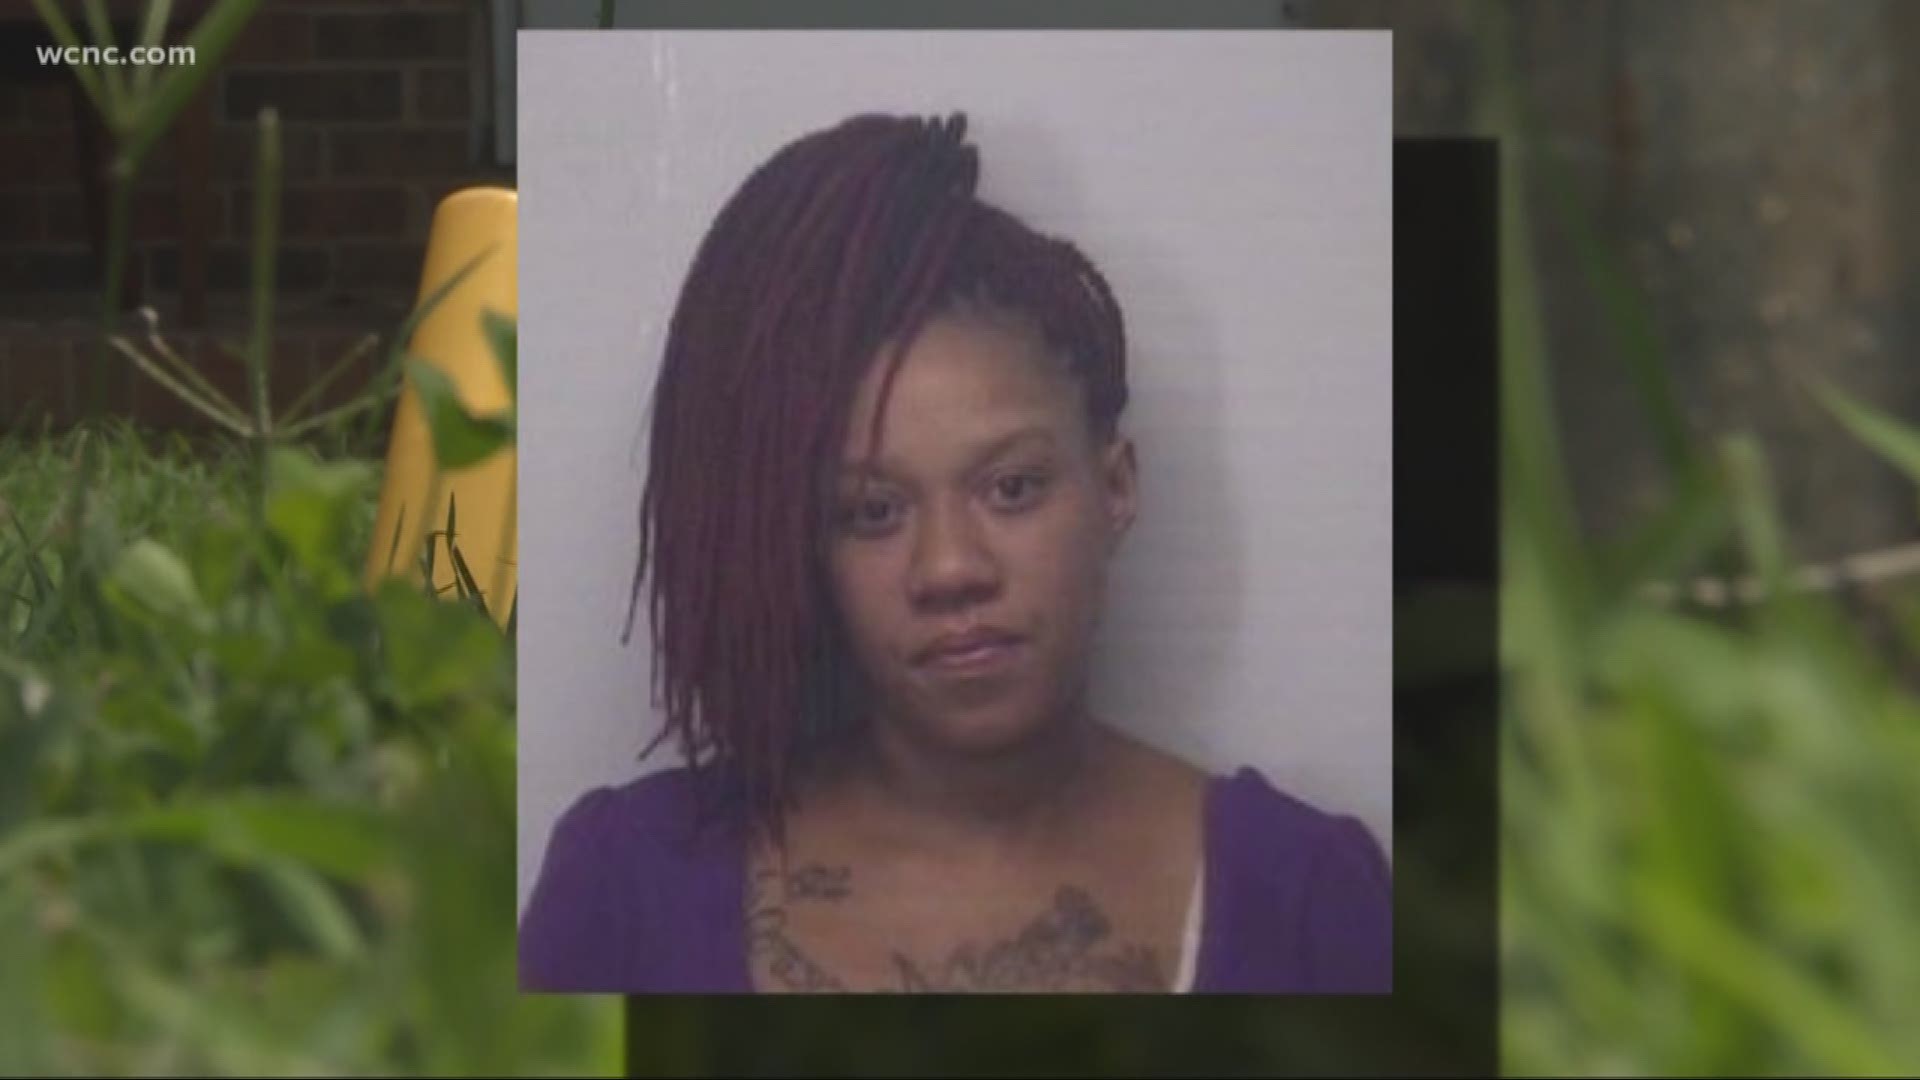 Police in Shelby say a mom left her kids alone at a home with no running water while she went out drinking.